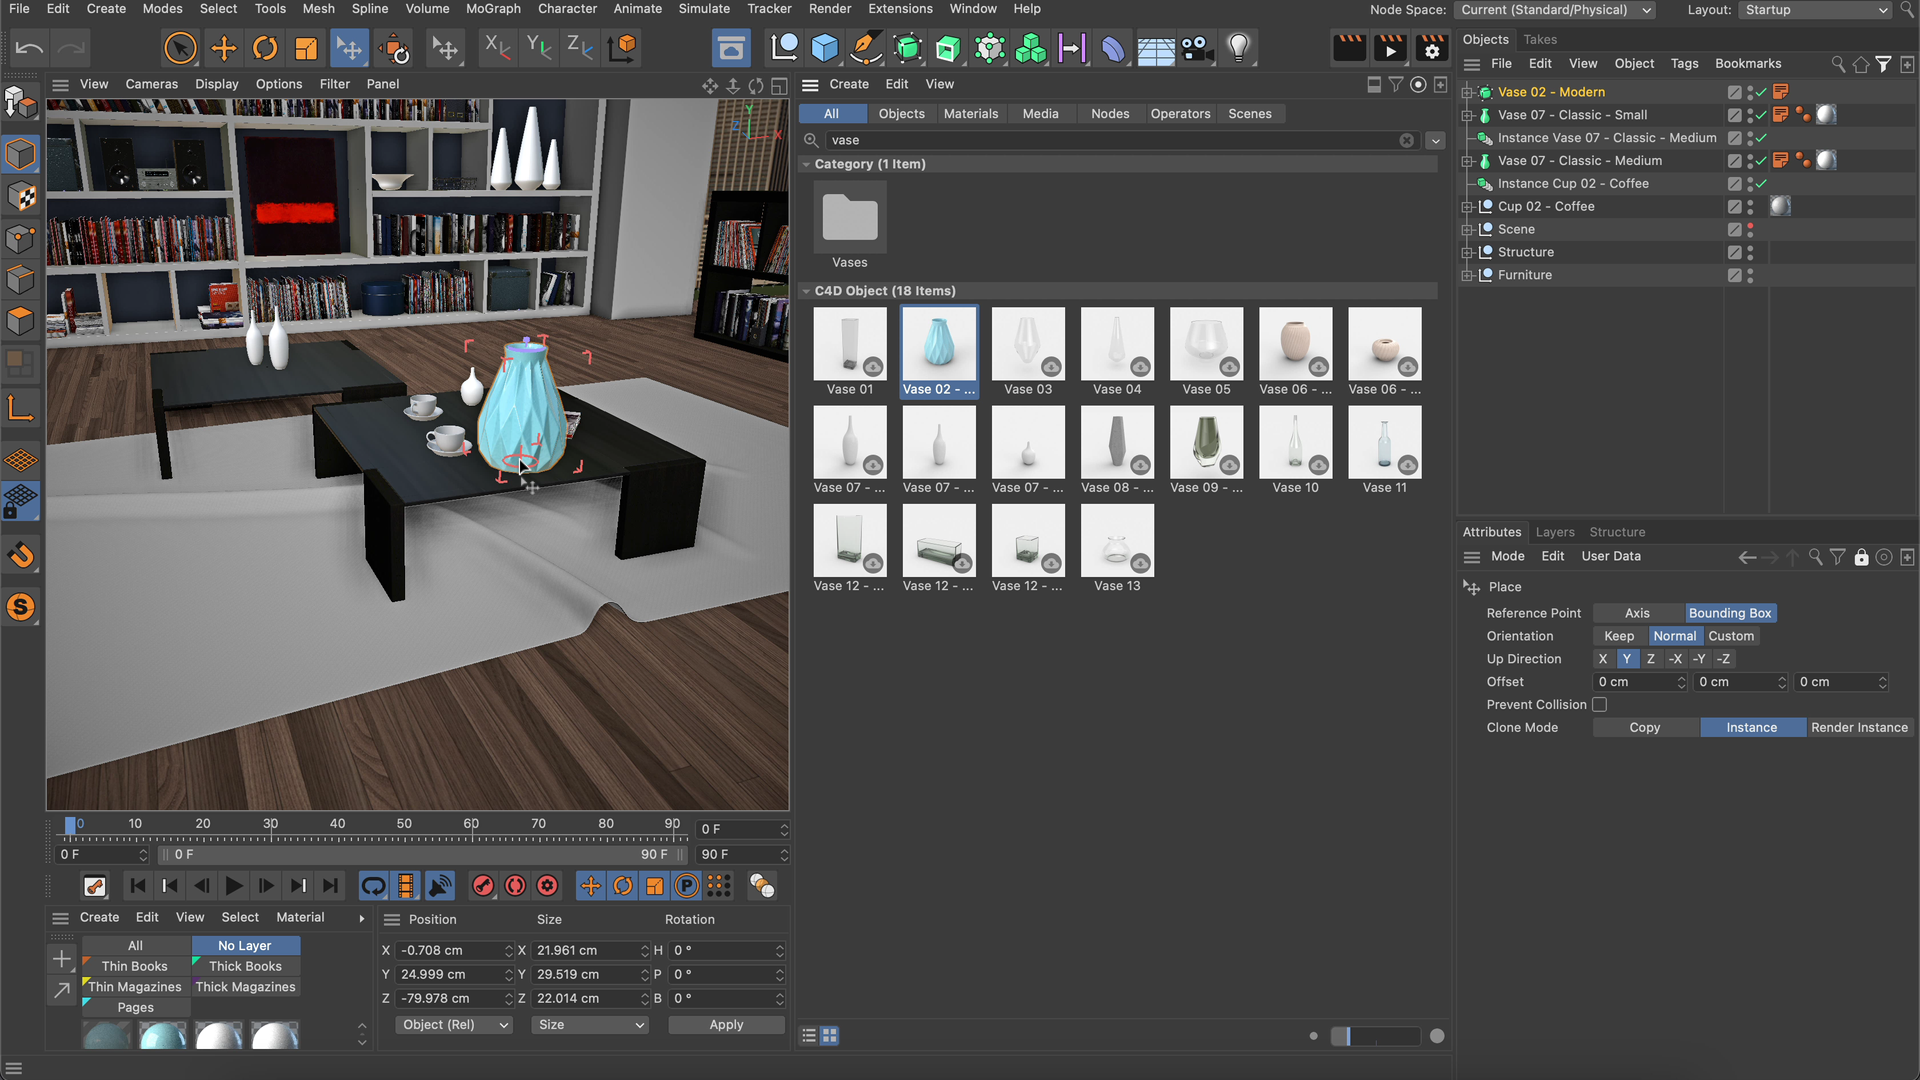 New Asset Browser makes it easy to find and use models, materials and other assets in your 3D scenes.